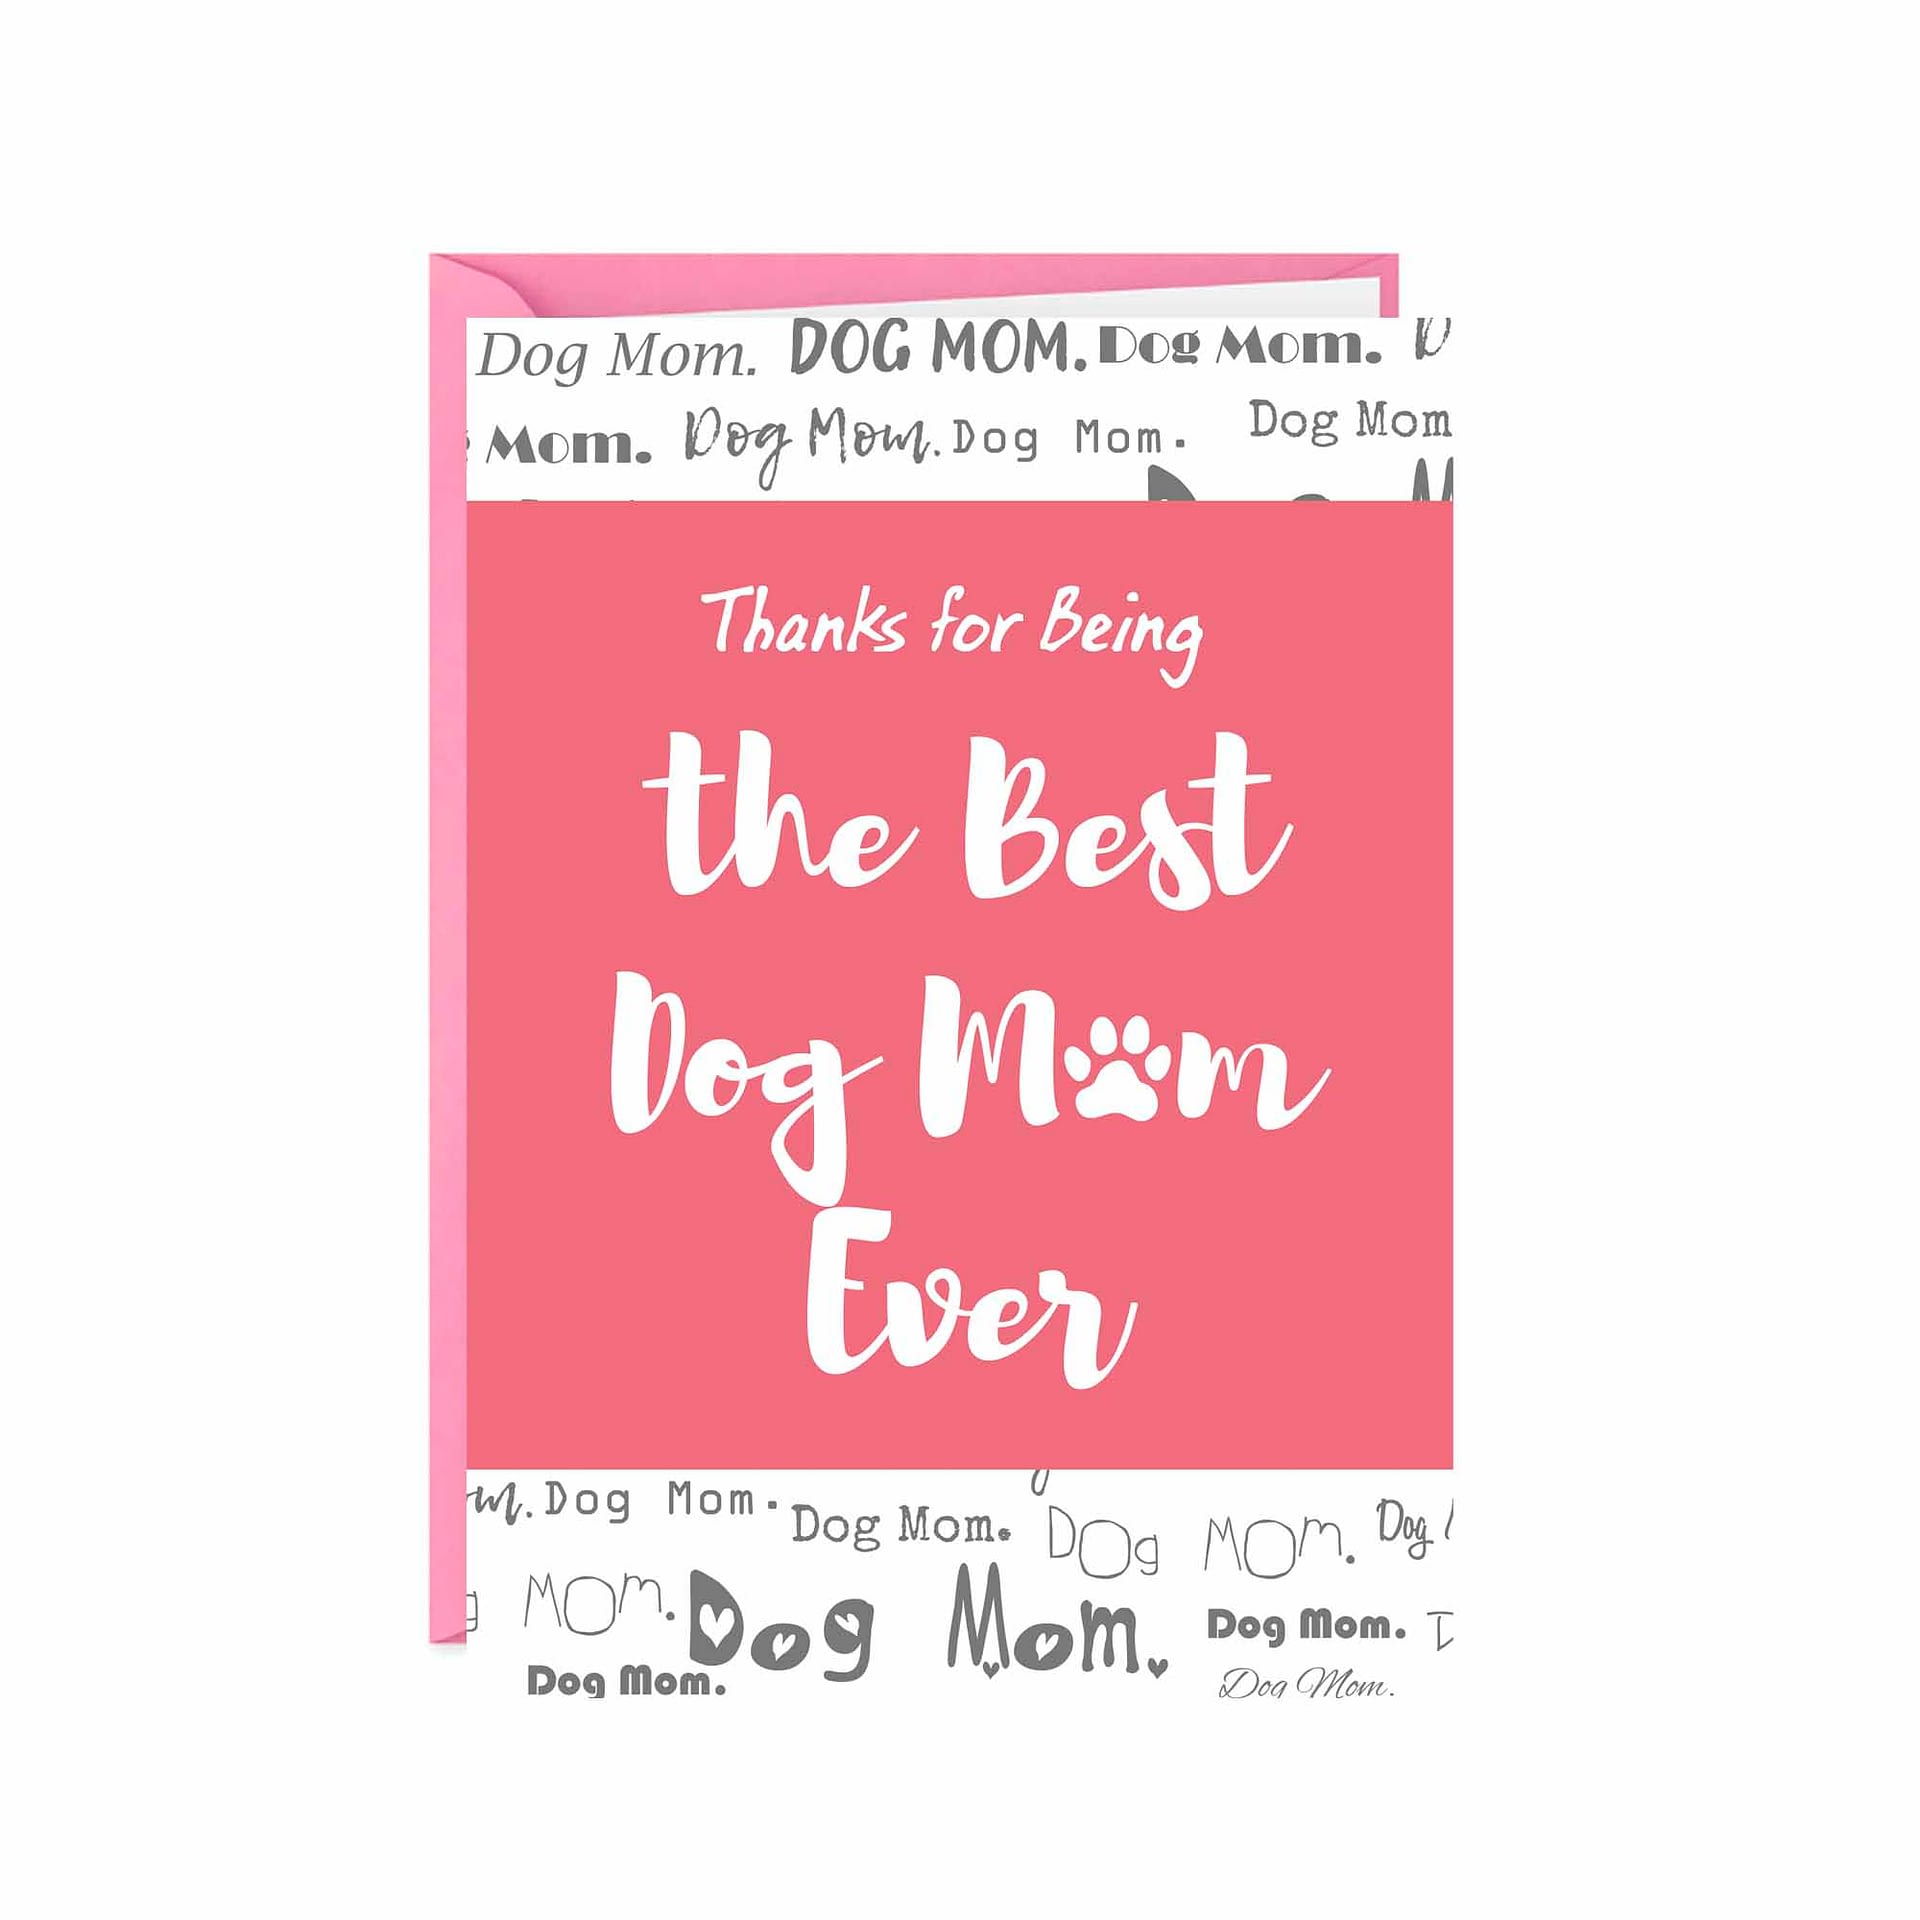 the-best-dog-mom-ever-mother-s-day-card-fromyourpet